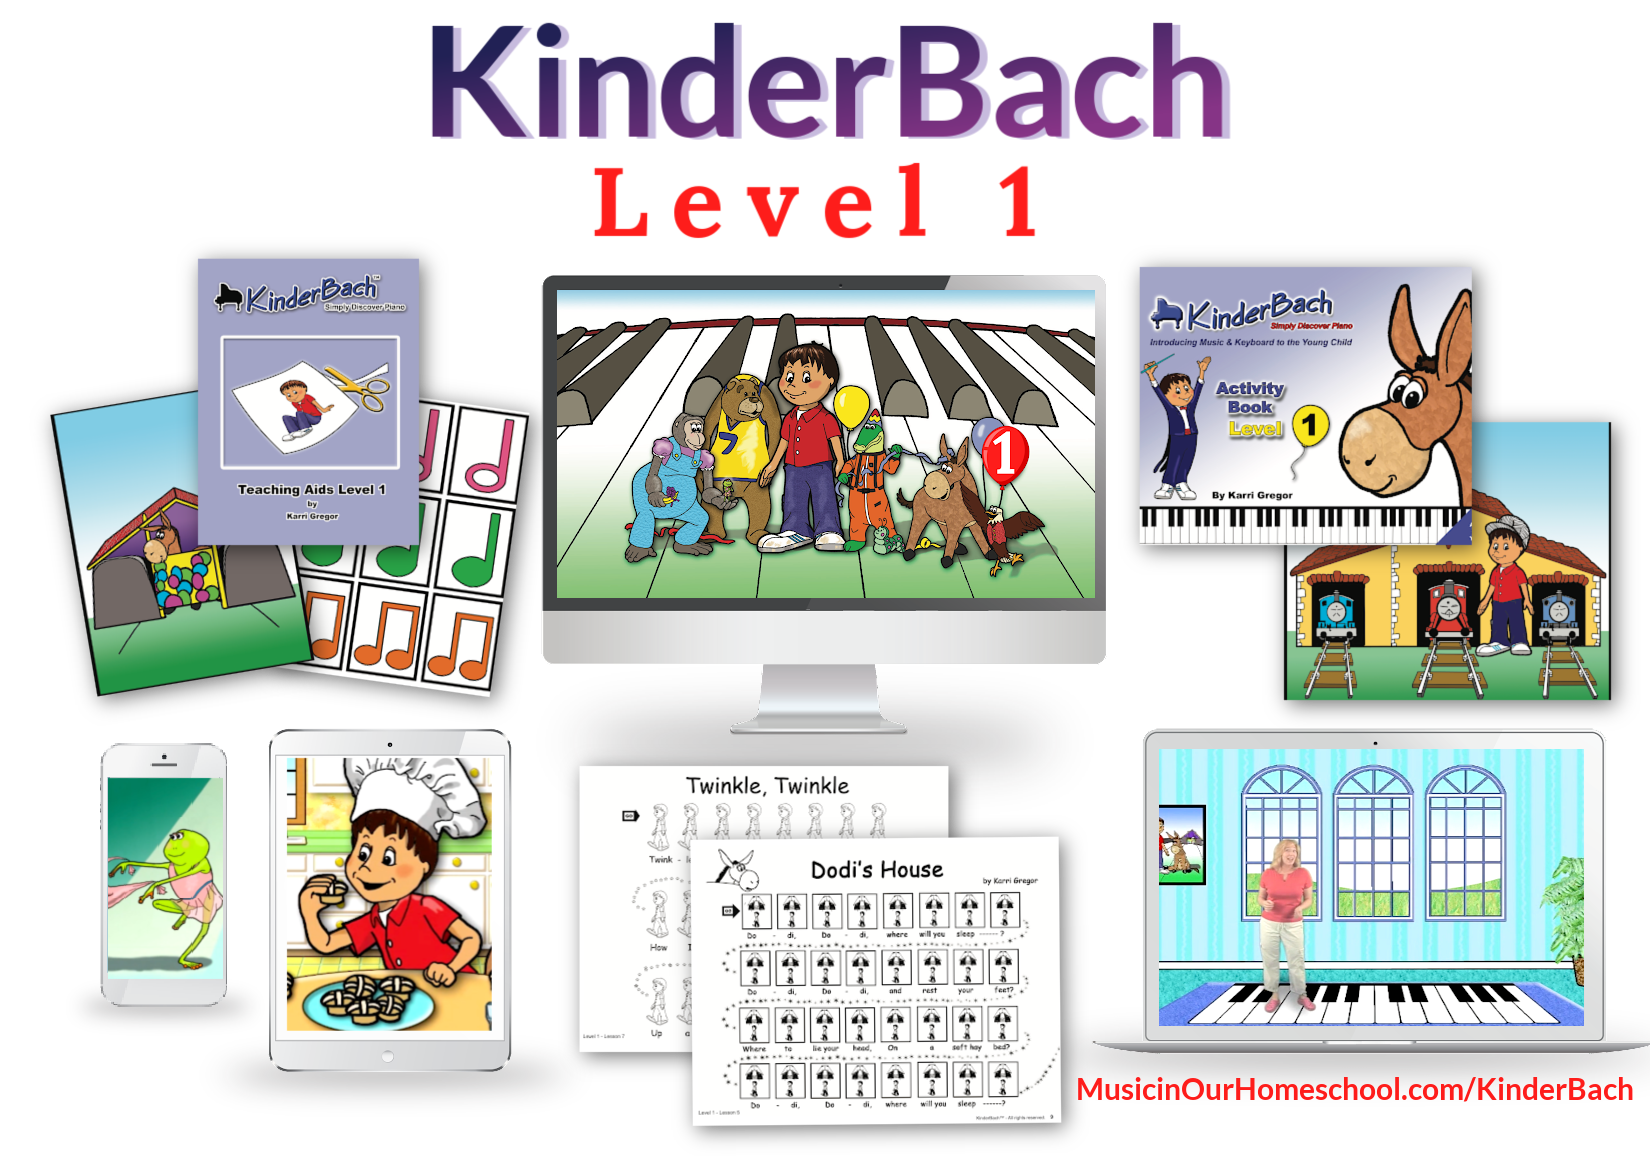 KinderBach Level 1 beginning piano and music theory for preschoolers